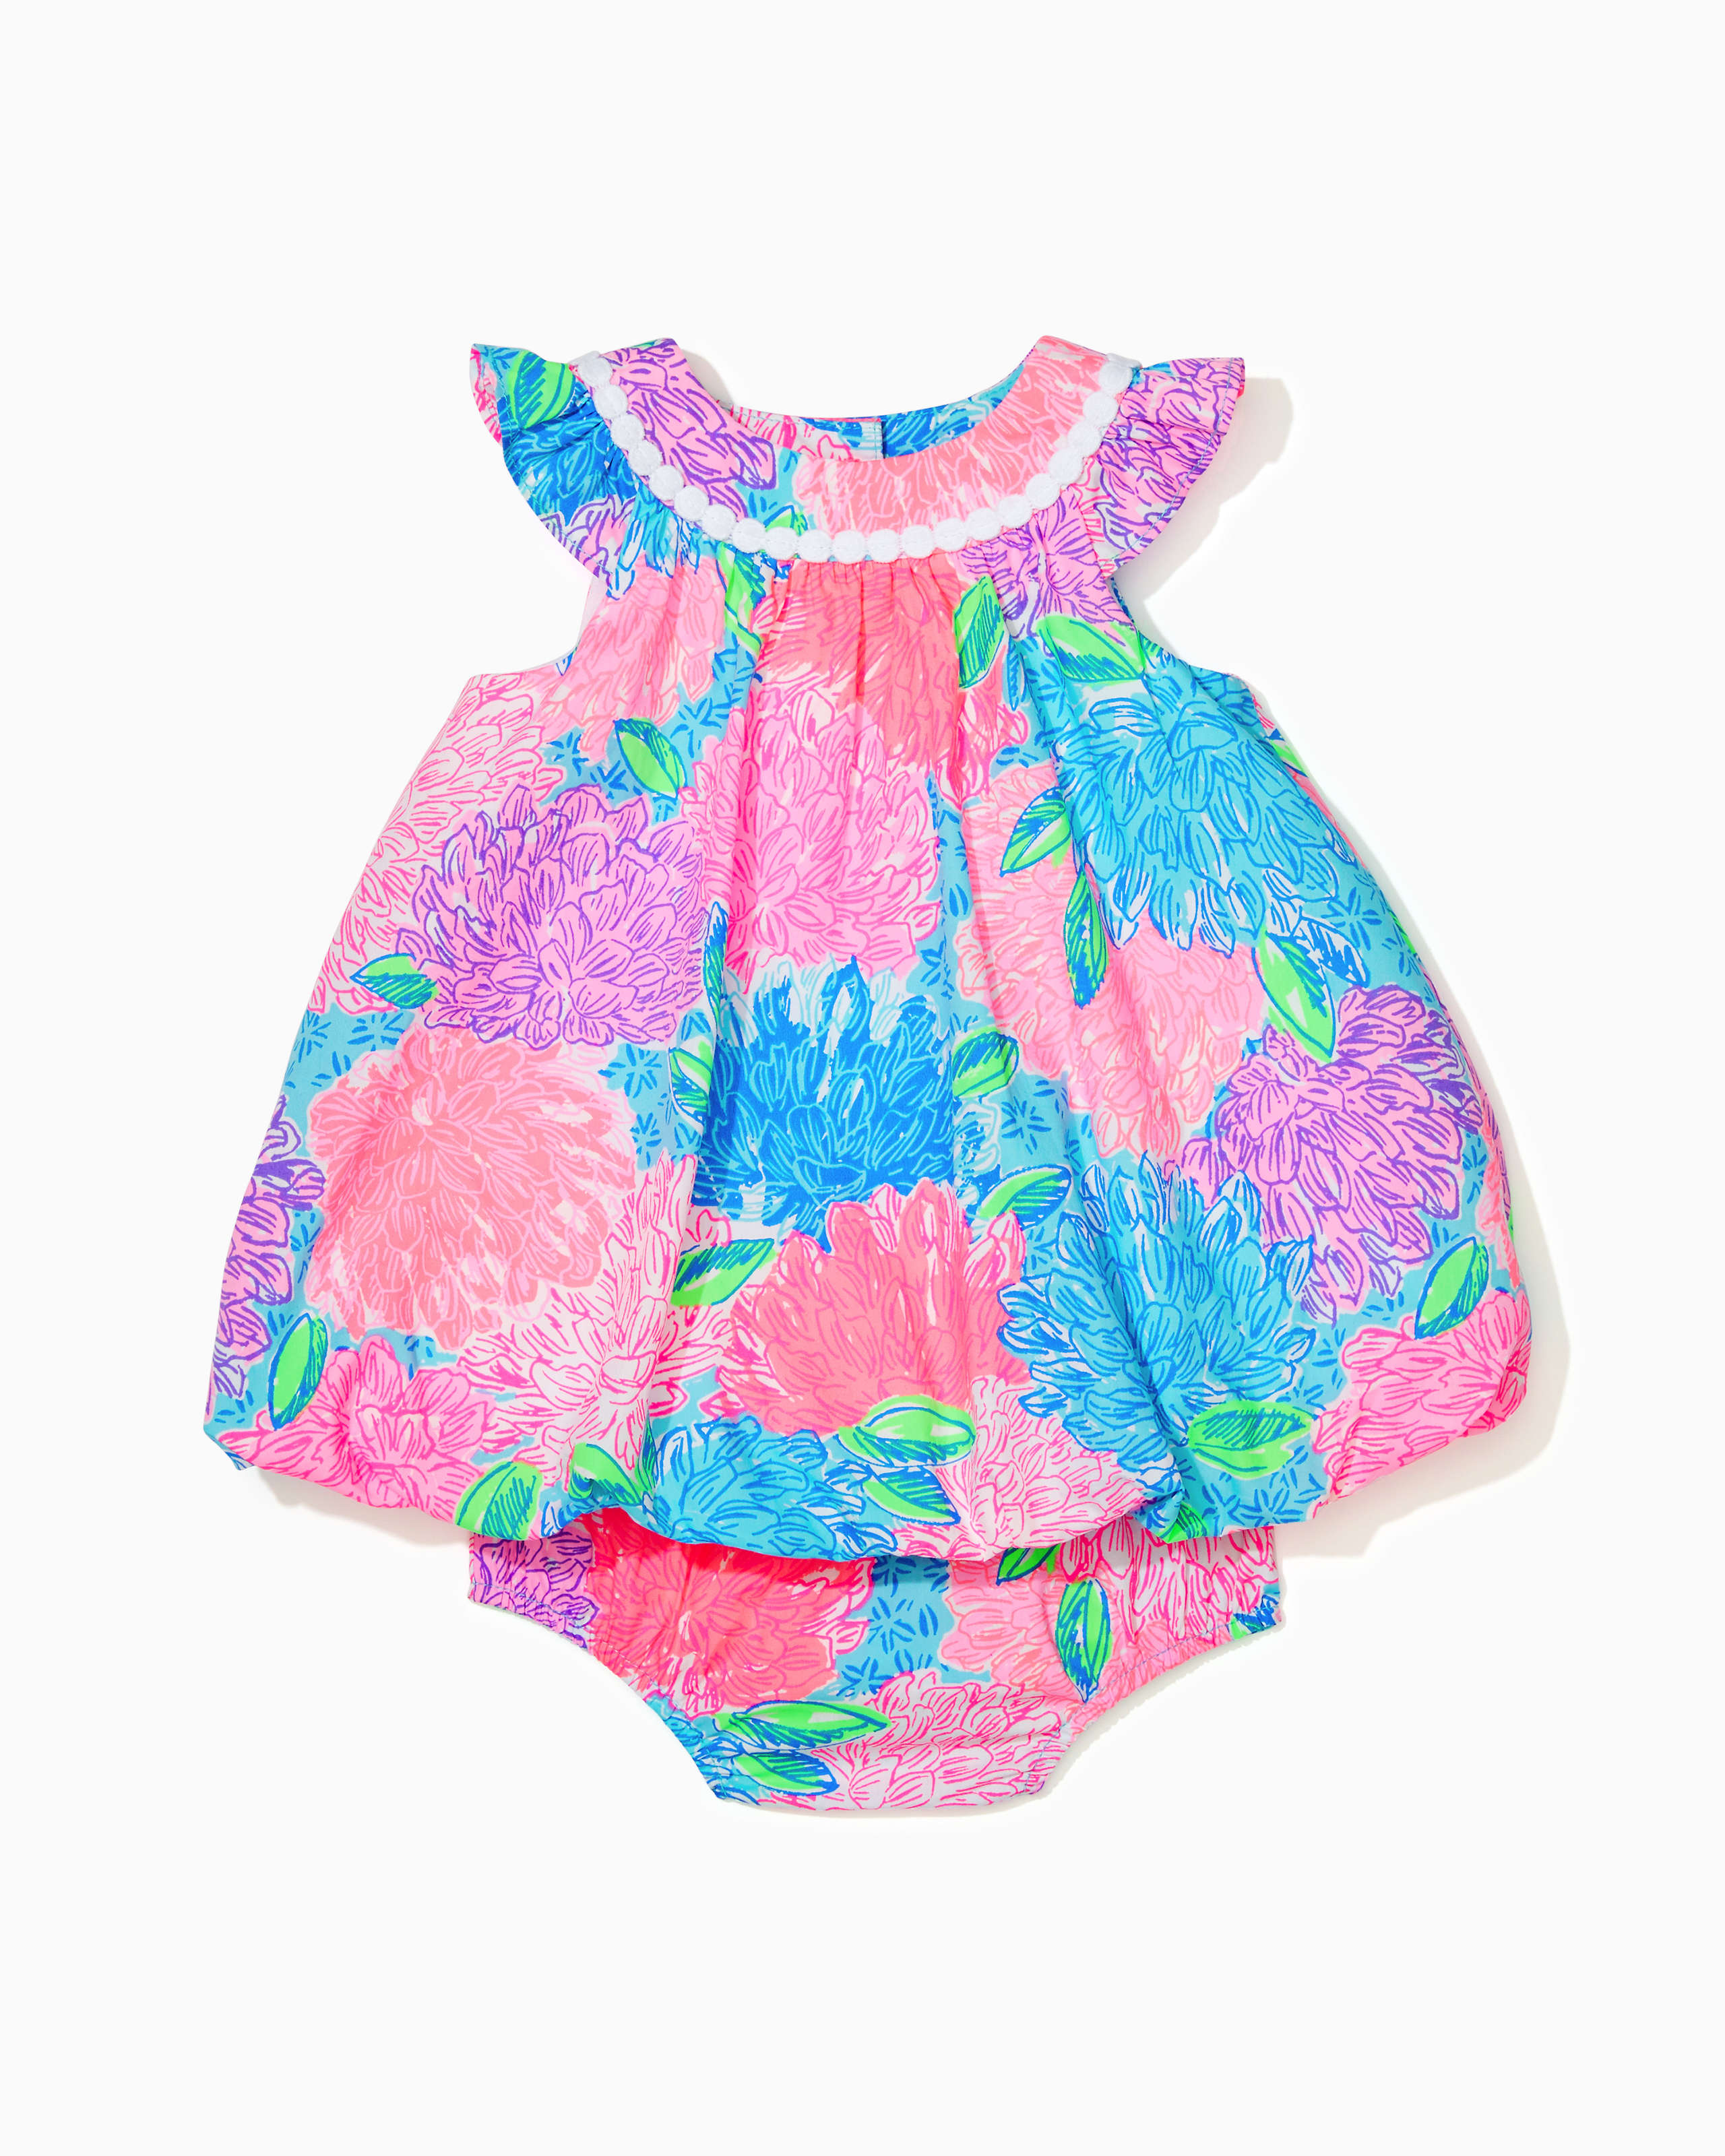 Baby Paloma Bubble Dress, Multi Beach House Blooms, large - Lilly Pulitzer Zoomed